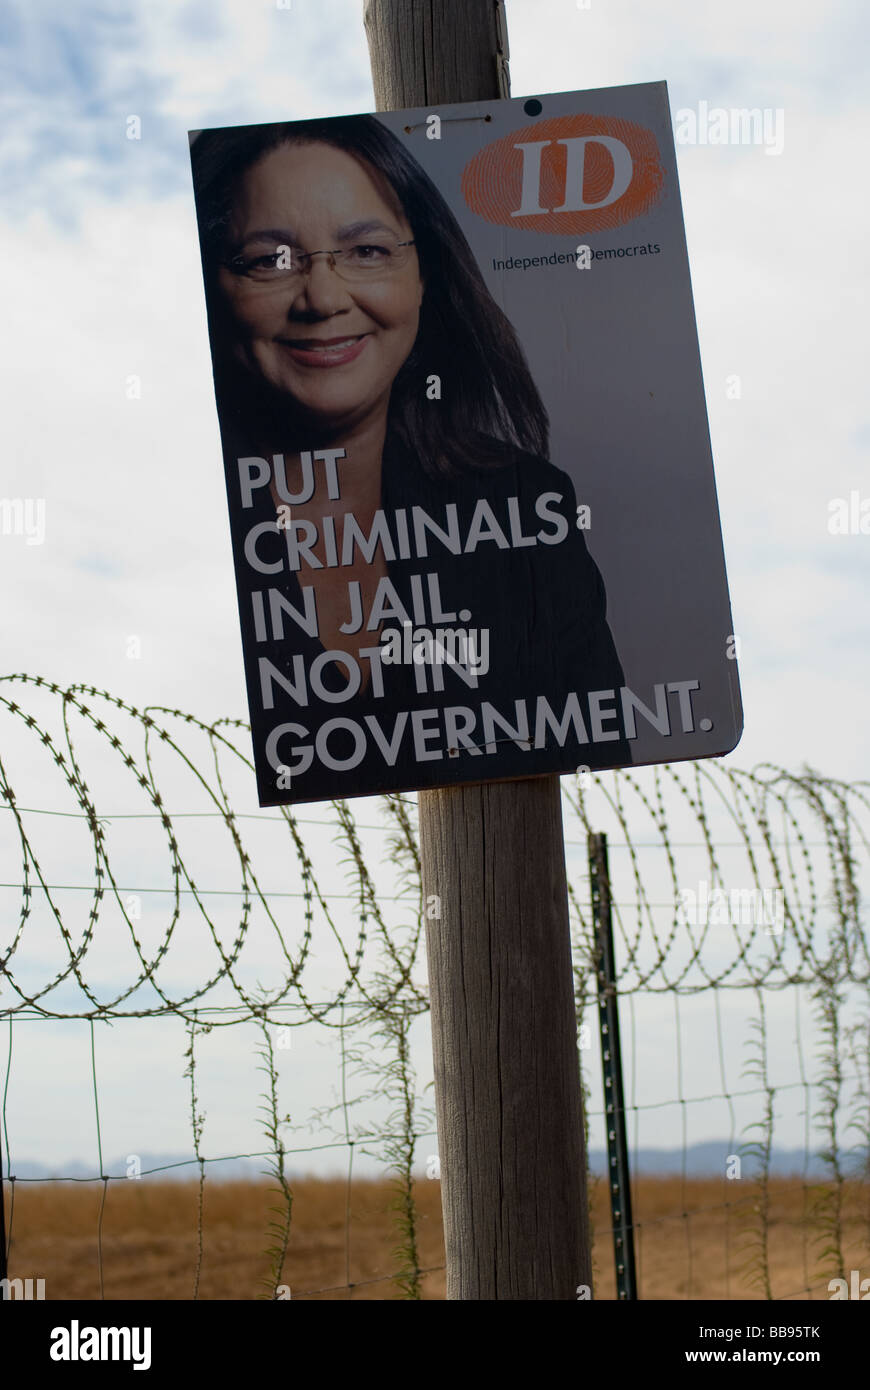 An election campaign poster for the Independent Democrats attacking Jacob Zuma and the ANC in the Western Cape, South Africa. Stock Photo